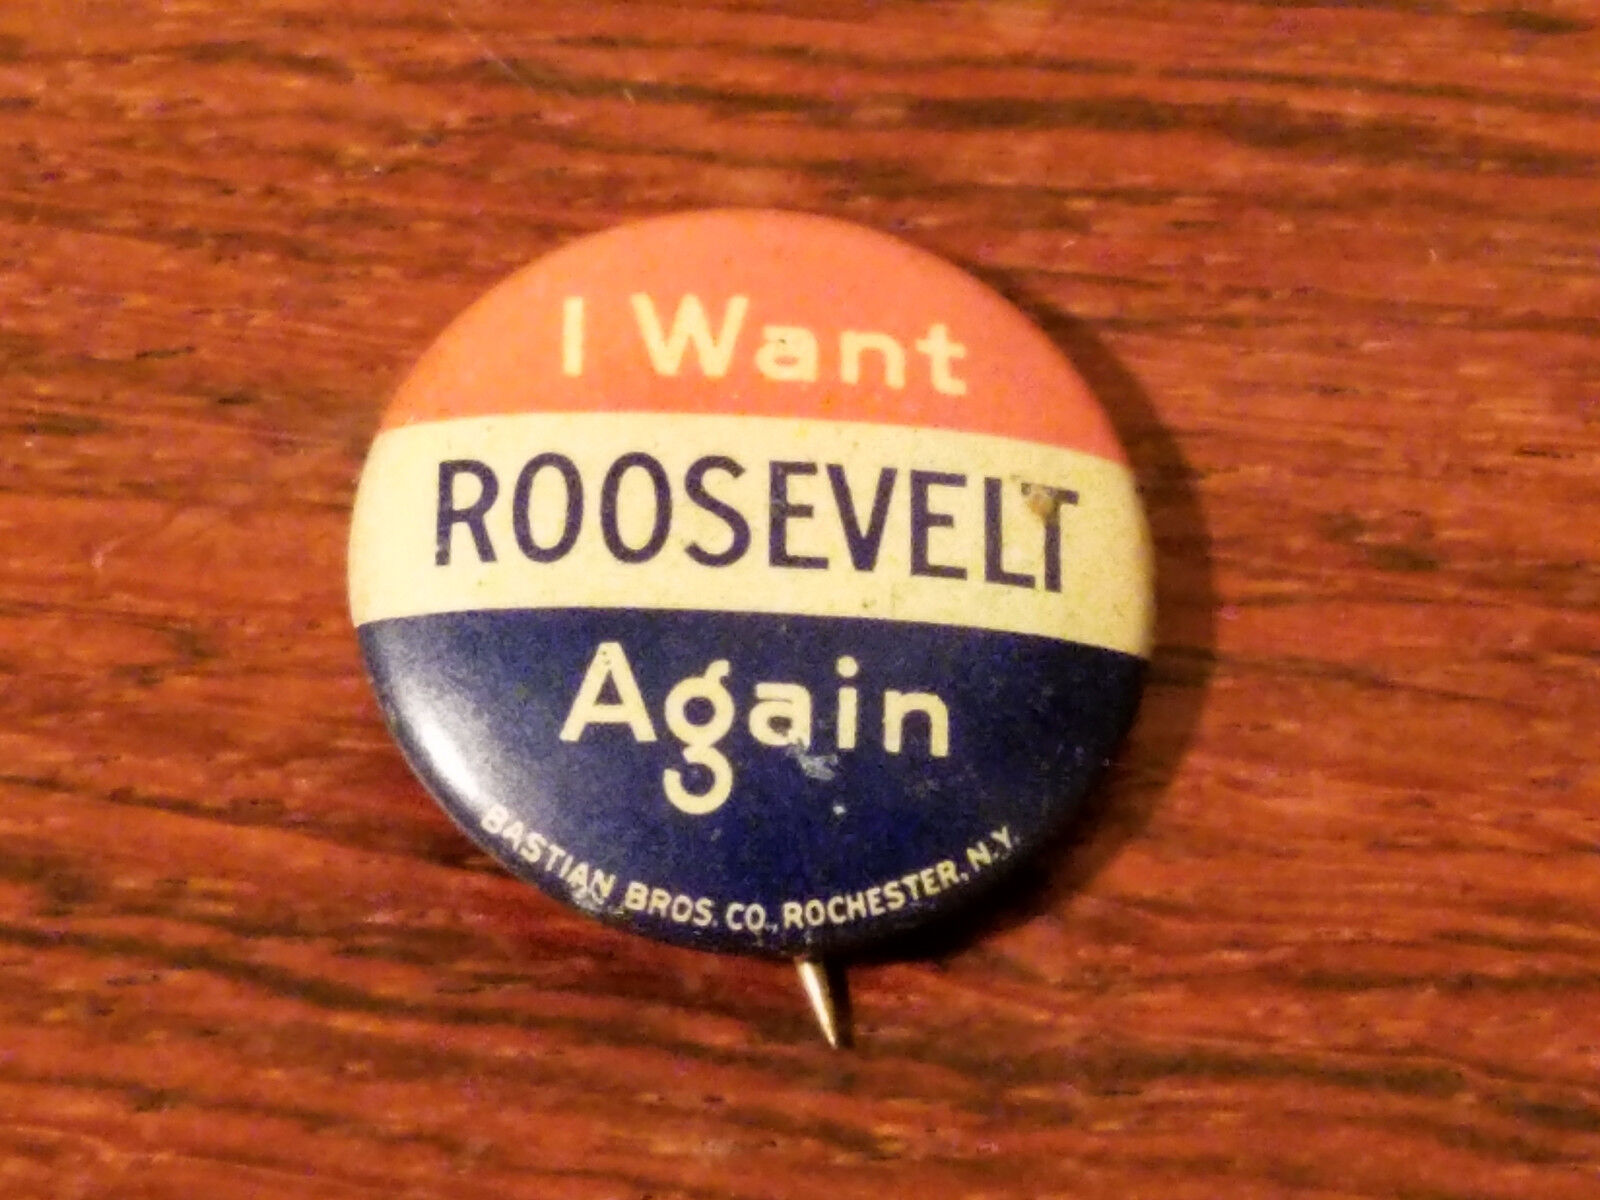 1940 / I WANT ROOSEVELT AGAIN PINBACK / 3rd TERM PRESIDENTIAL CAMPAIGN PIN